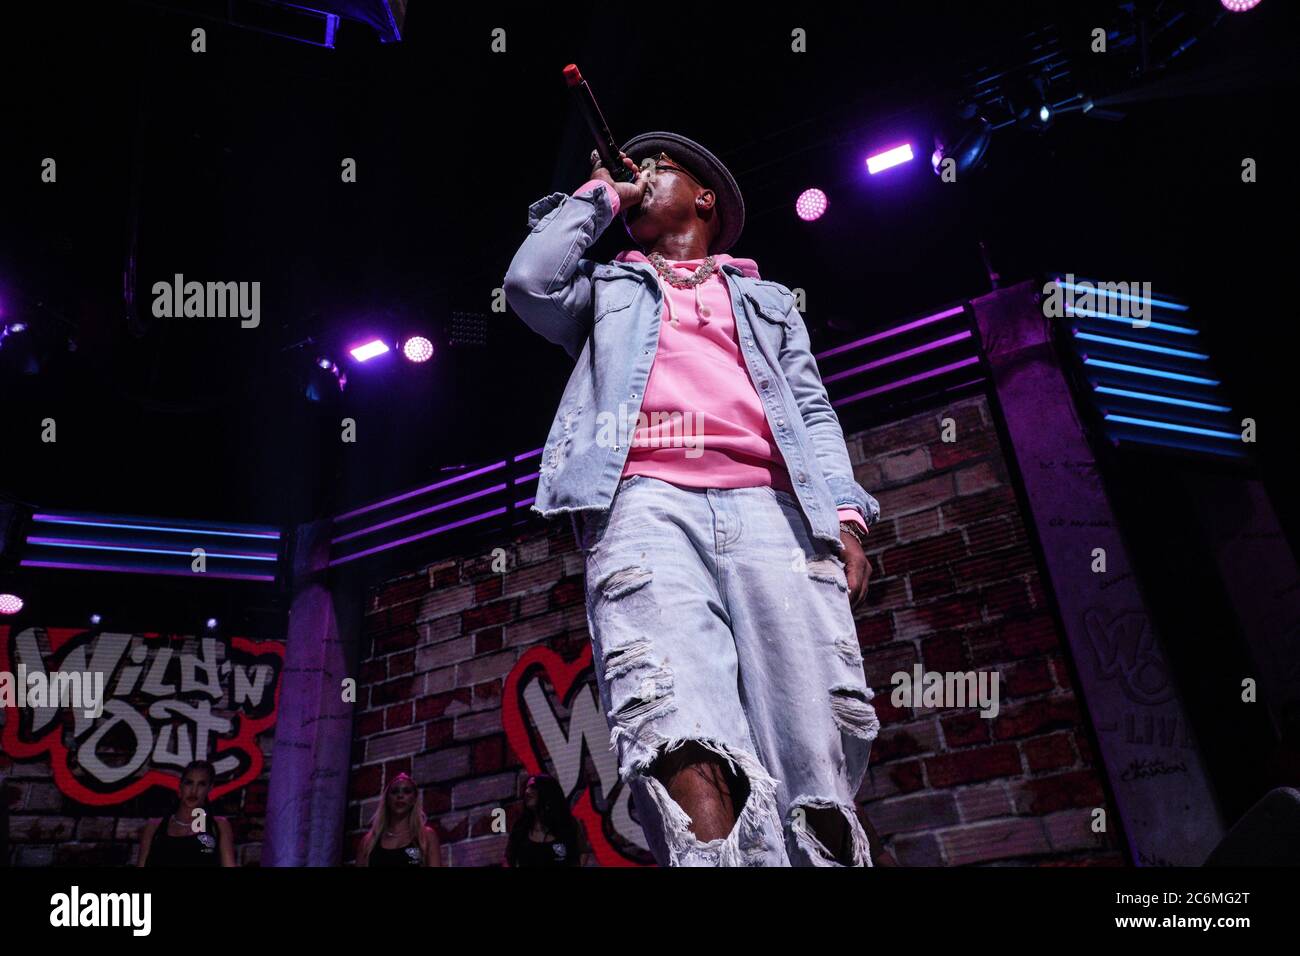 Mtv Wild Out Tour Hosted Nick Cannon Amway Center Orlando – Stock